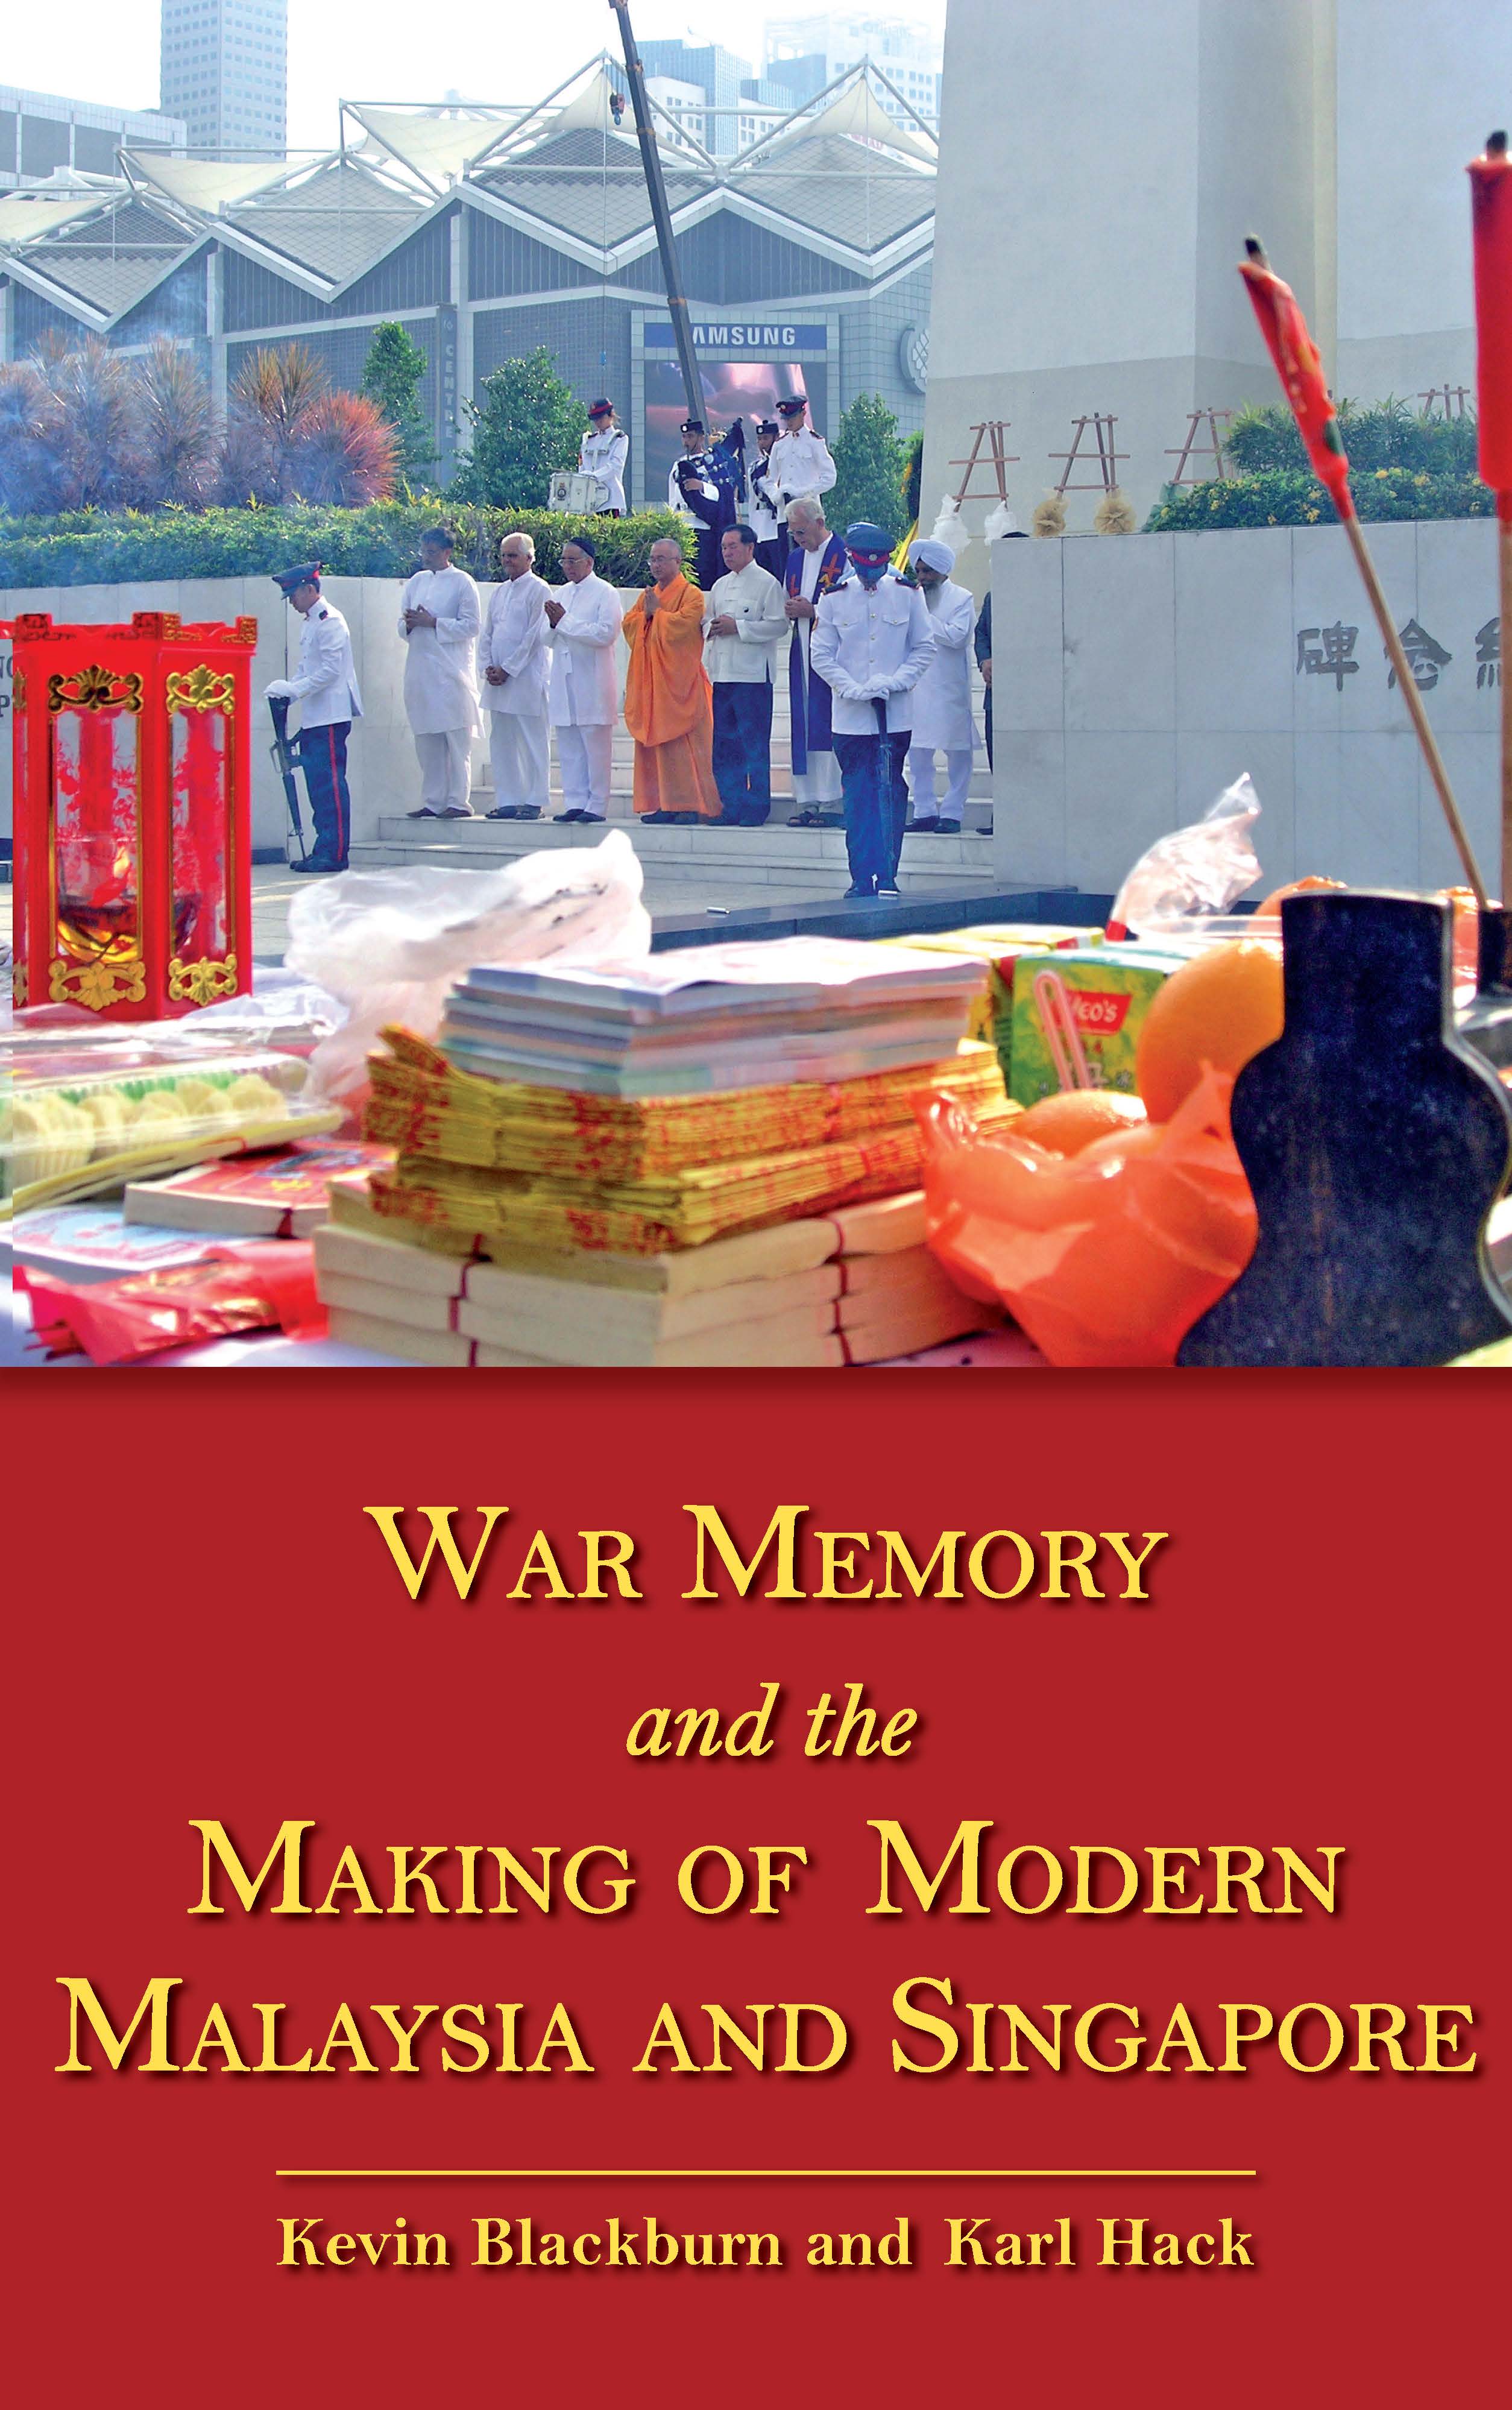 War Memory and the Making of Modern Malaysia and Singapore